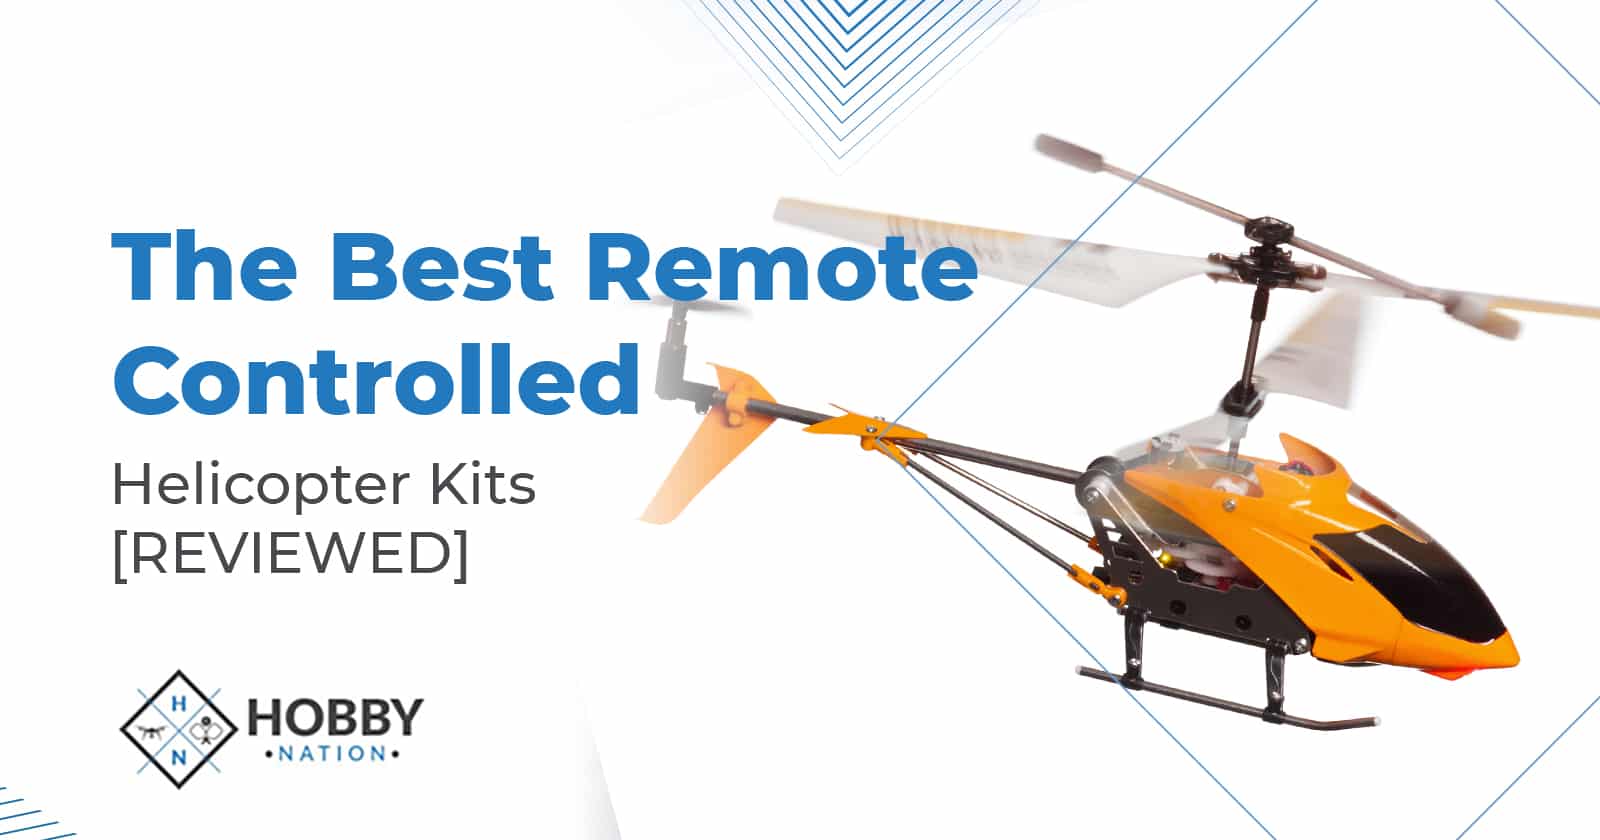 The Best Remote Controlled Helicopter Kits [REVIEWED]